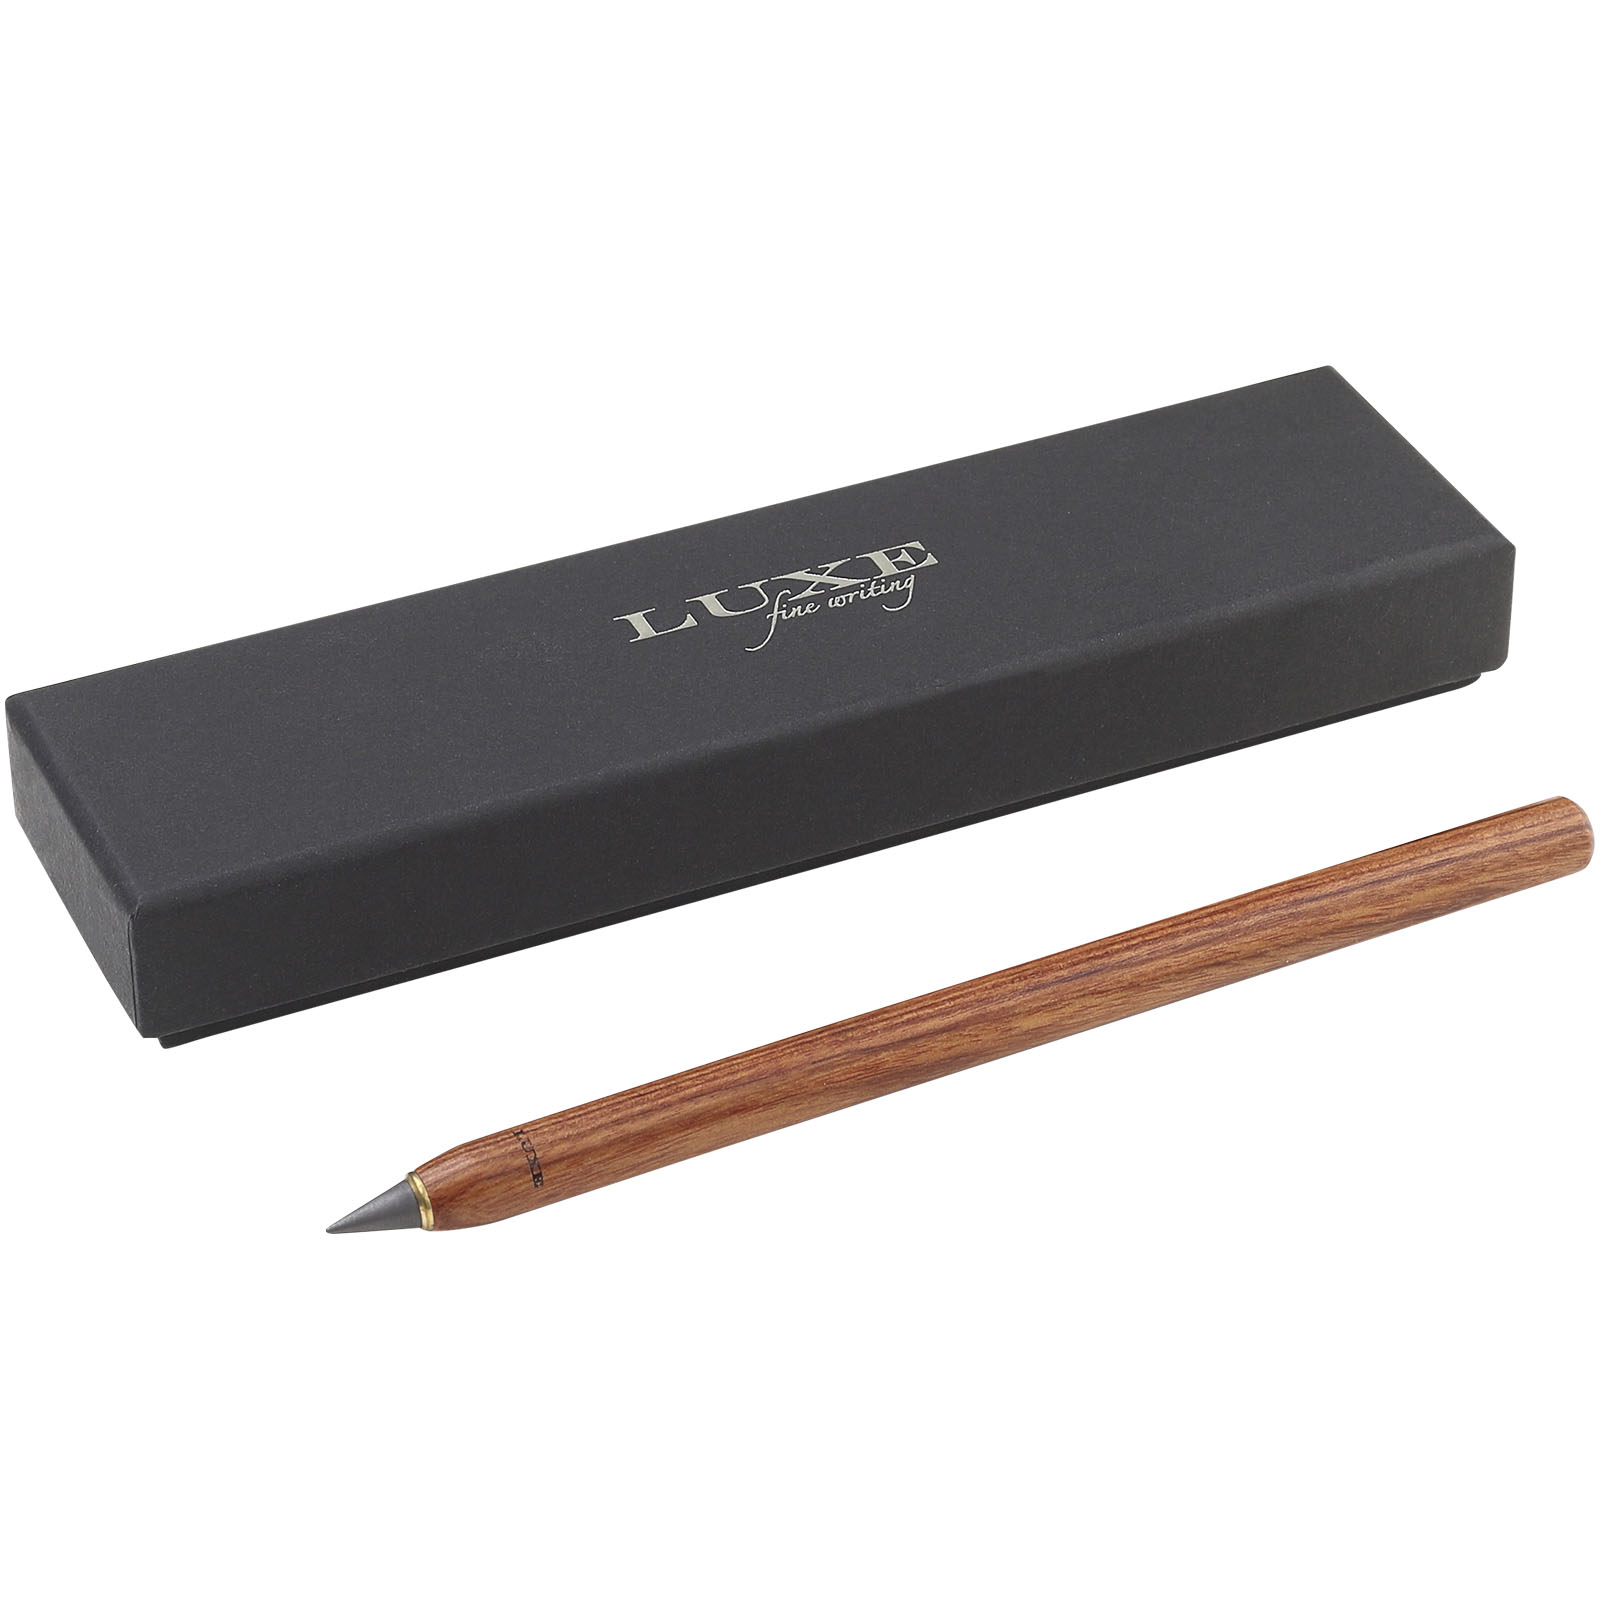 Advertising Other Pens & Writing Accessories - Etern inkless pen - 5